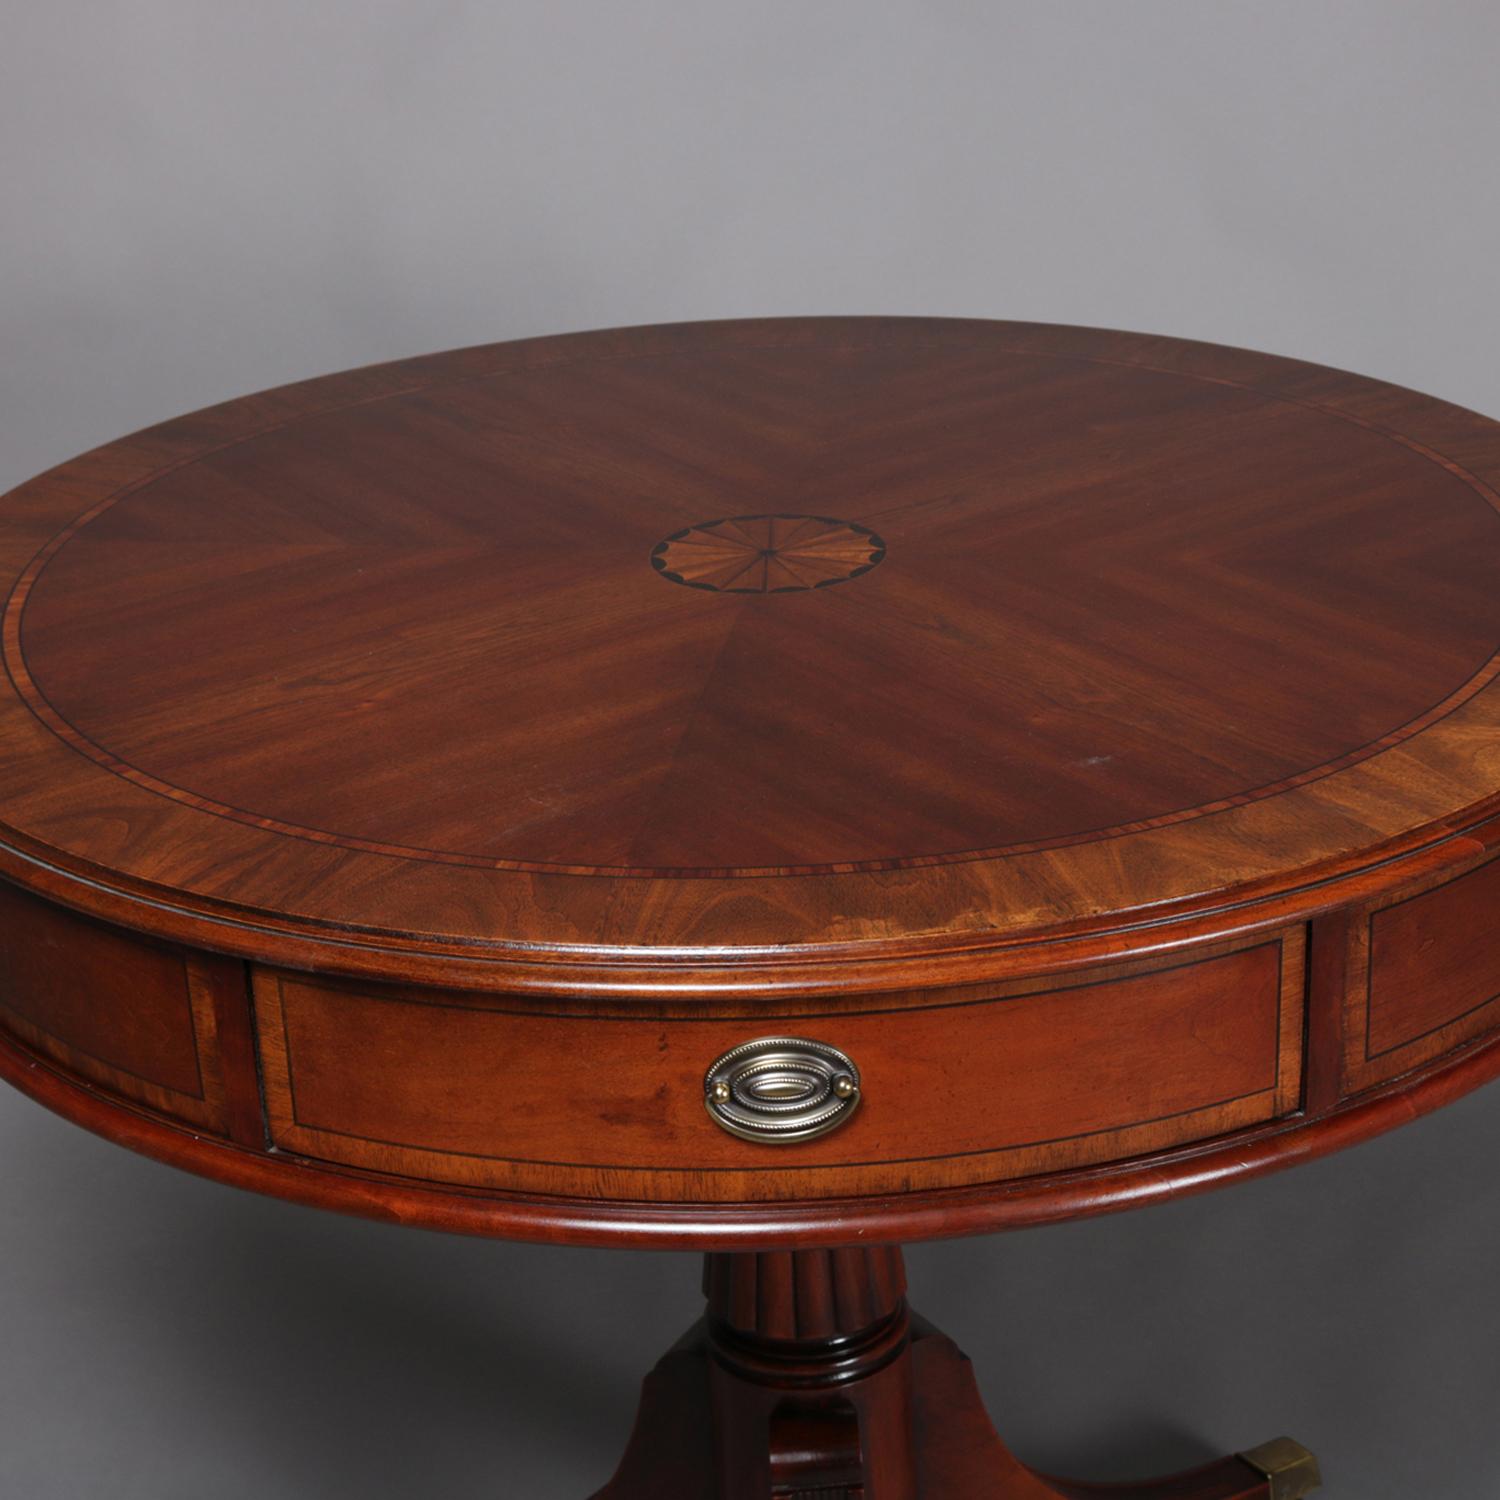 20th Century English Regency Style Inlaid Mahogany 6-Drawer Center Table by Lexington